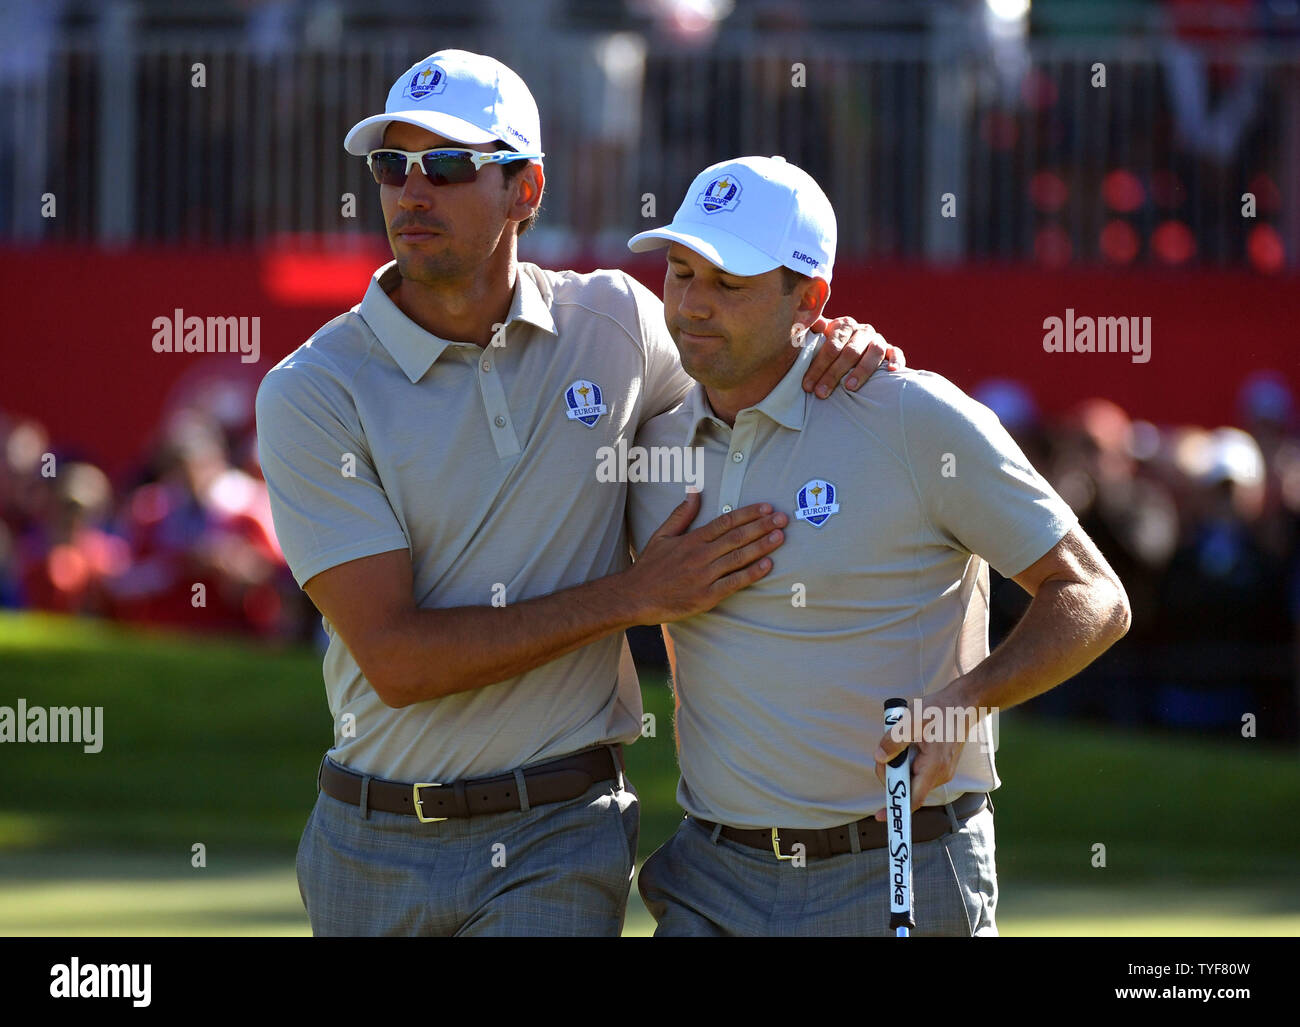 European team member Rafa Cabrera Bello consoles Sergio Garcia after he missed a putt on the 11th green during day 2 of the 2016 Ryder Cup at Hazeltine National Golf Club in Chaska, Minnesota on October 1, 2016. Photo by Kevin Dietsch/UPI Stock Photo